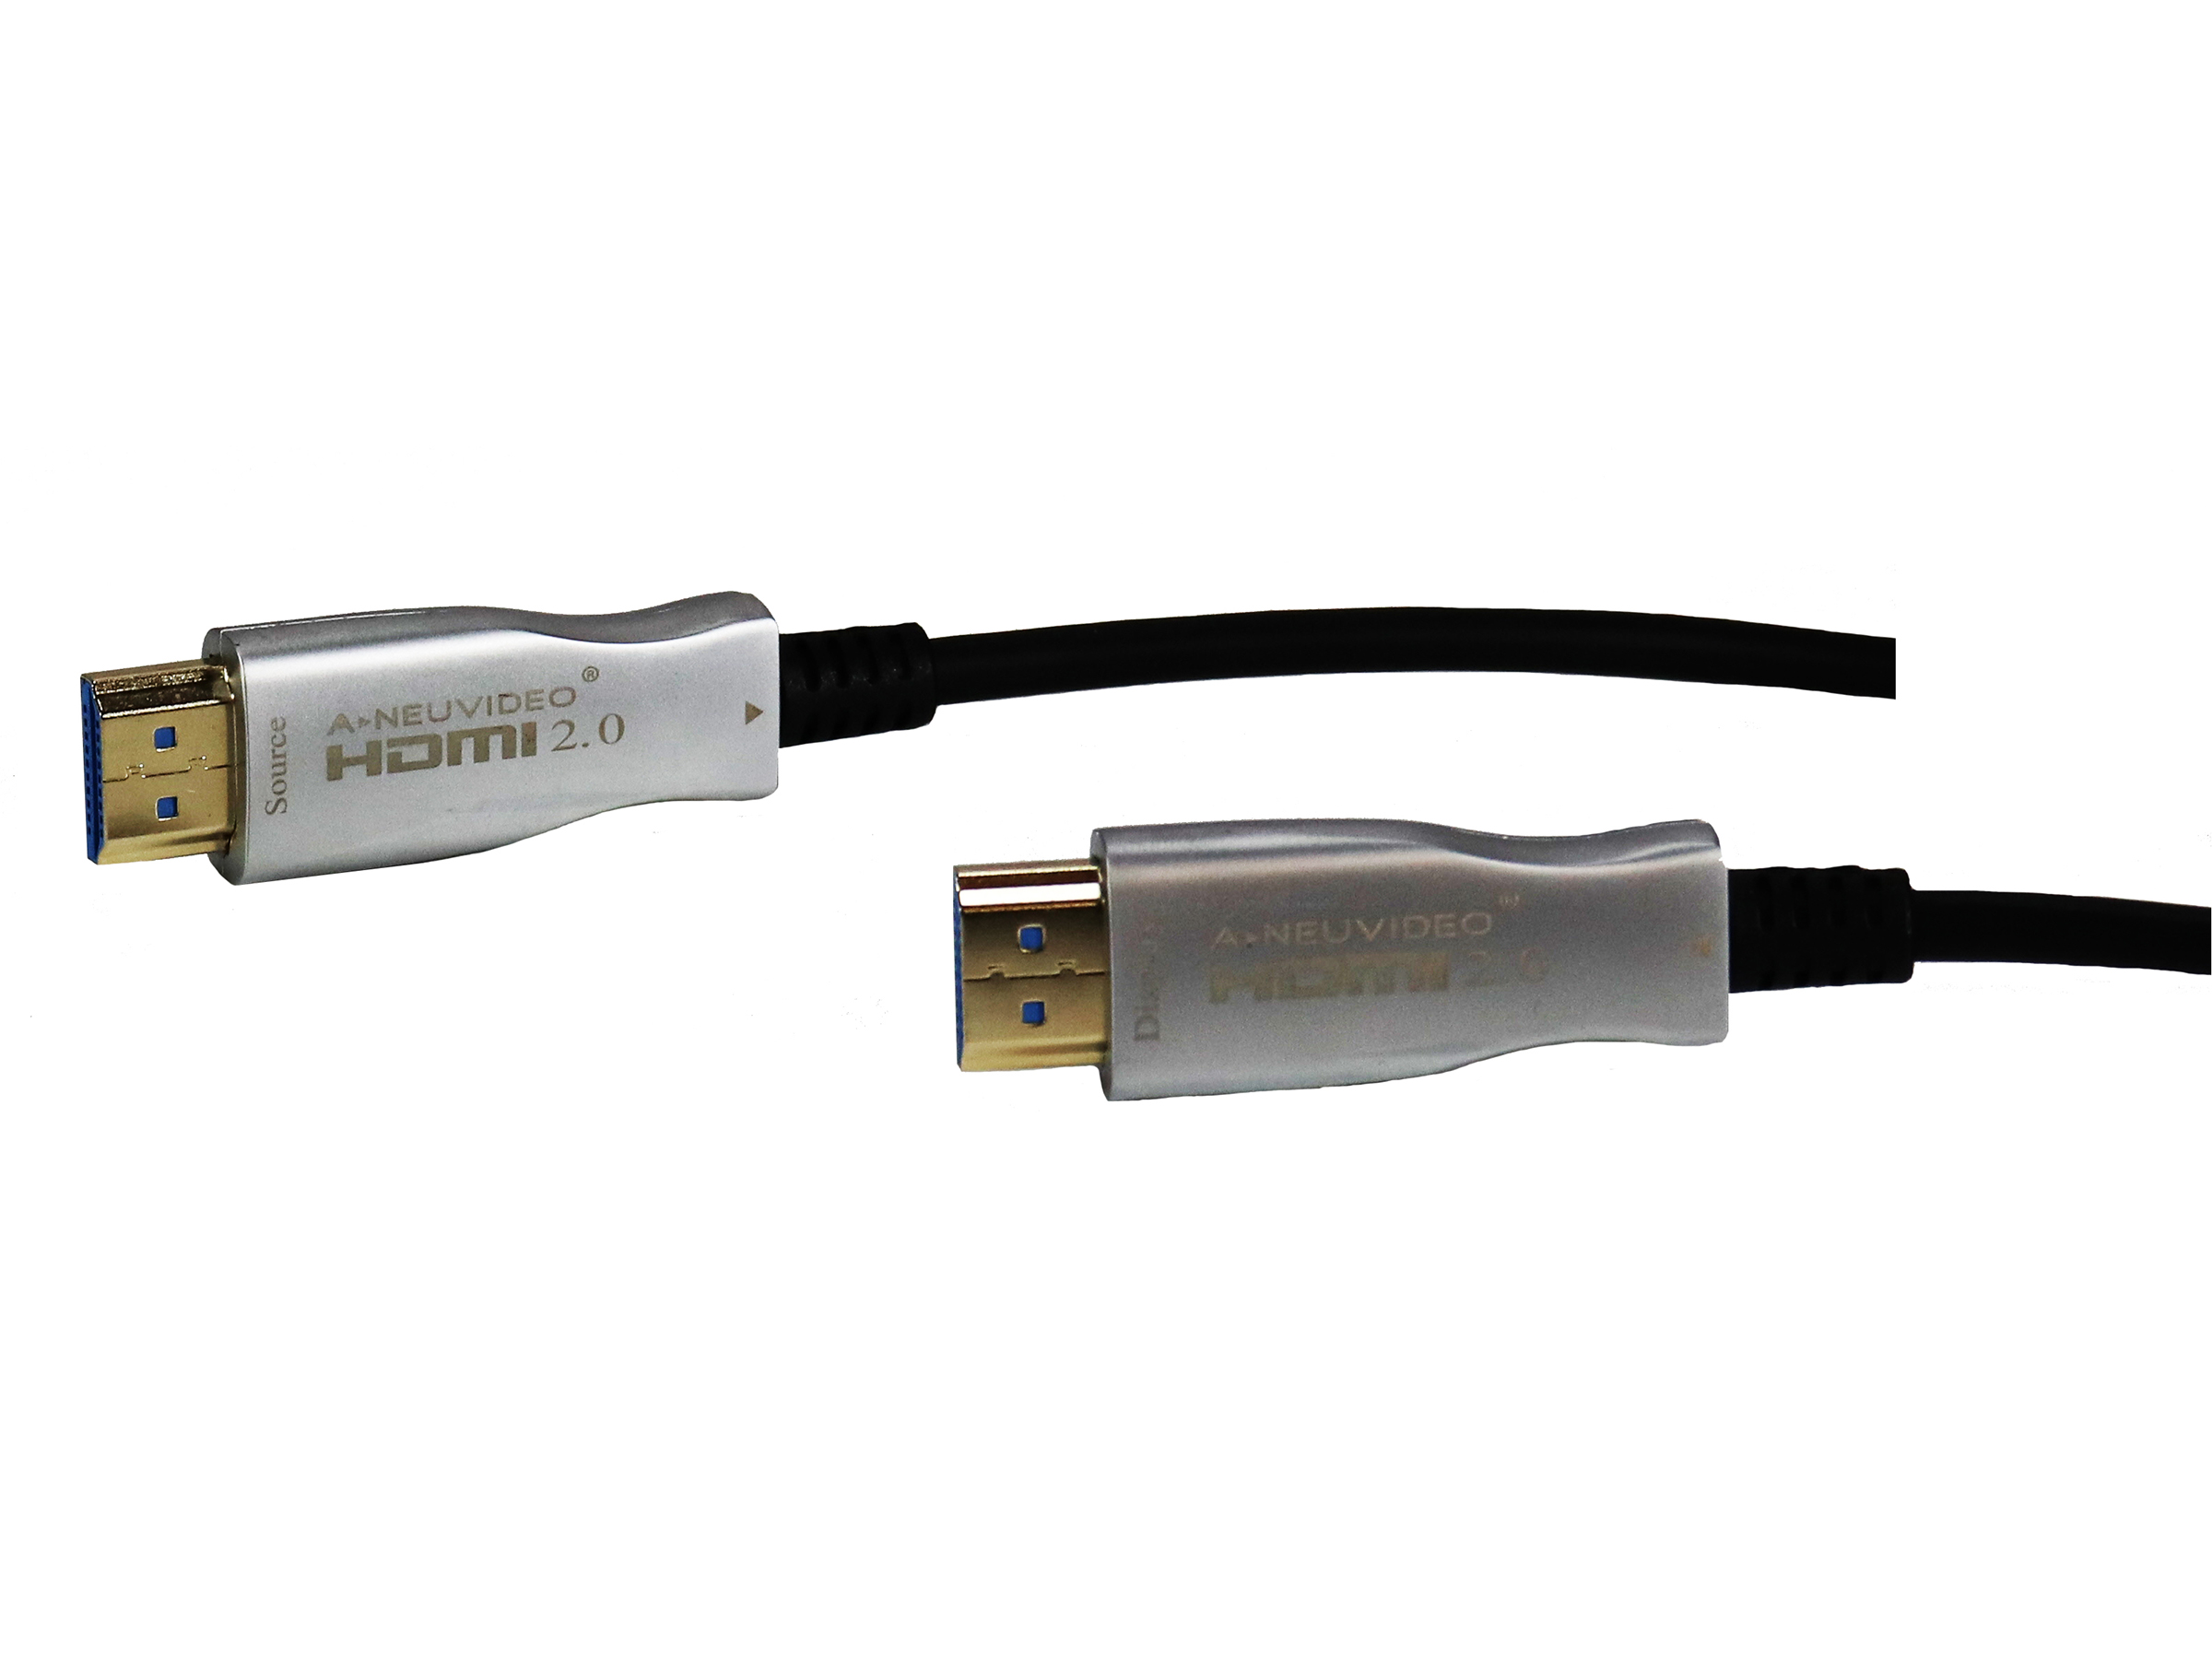 ANI-AOC-90 Fiber Optic Hdmi Active Optical Cable - 90m/295ft by A-NeuVideo